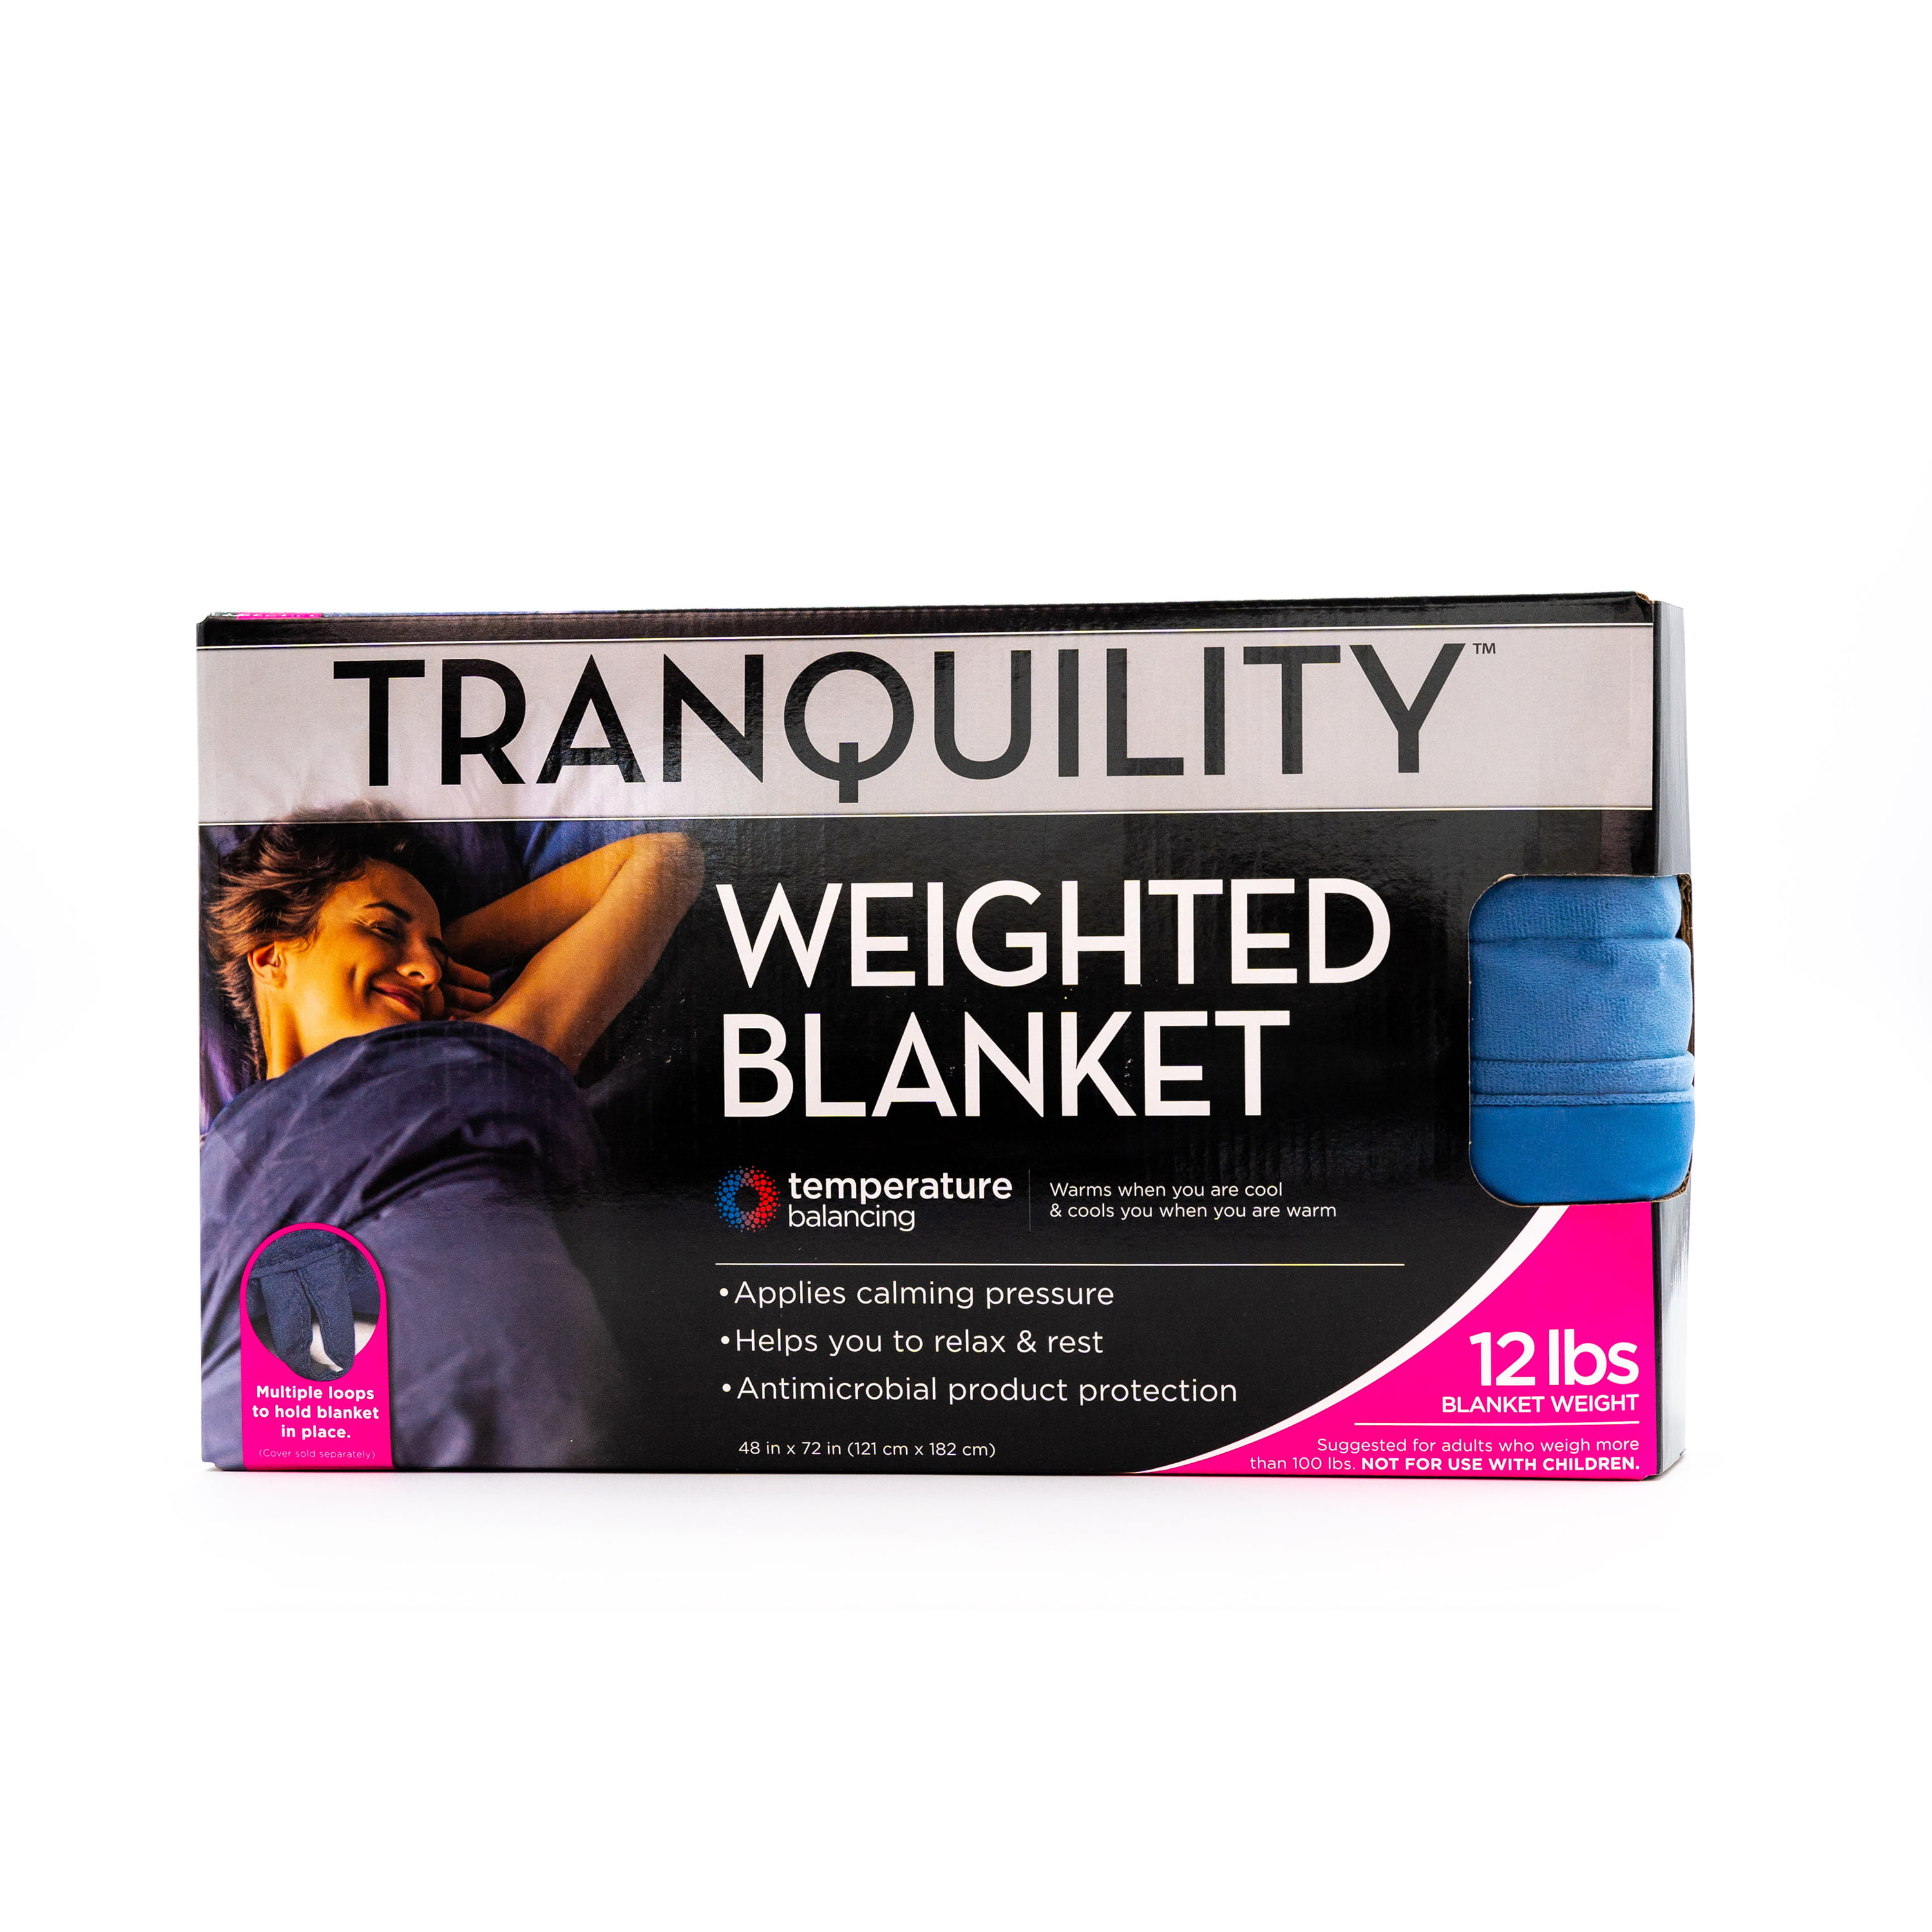 12lb Tranquility Temperature Balancing Weighted Blanket (Midnight Blue or Pewter) $24.99